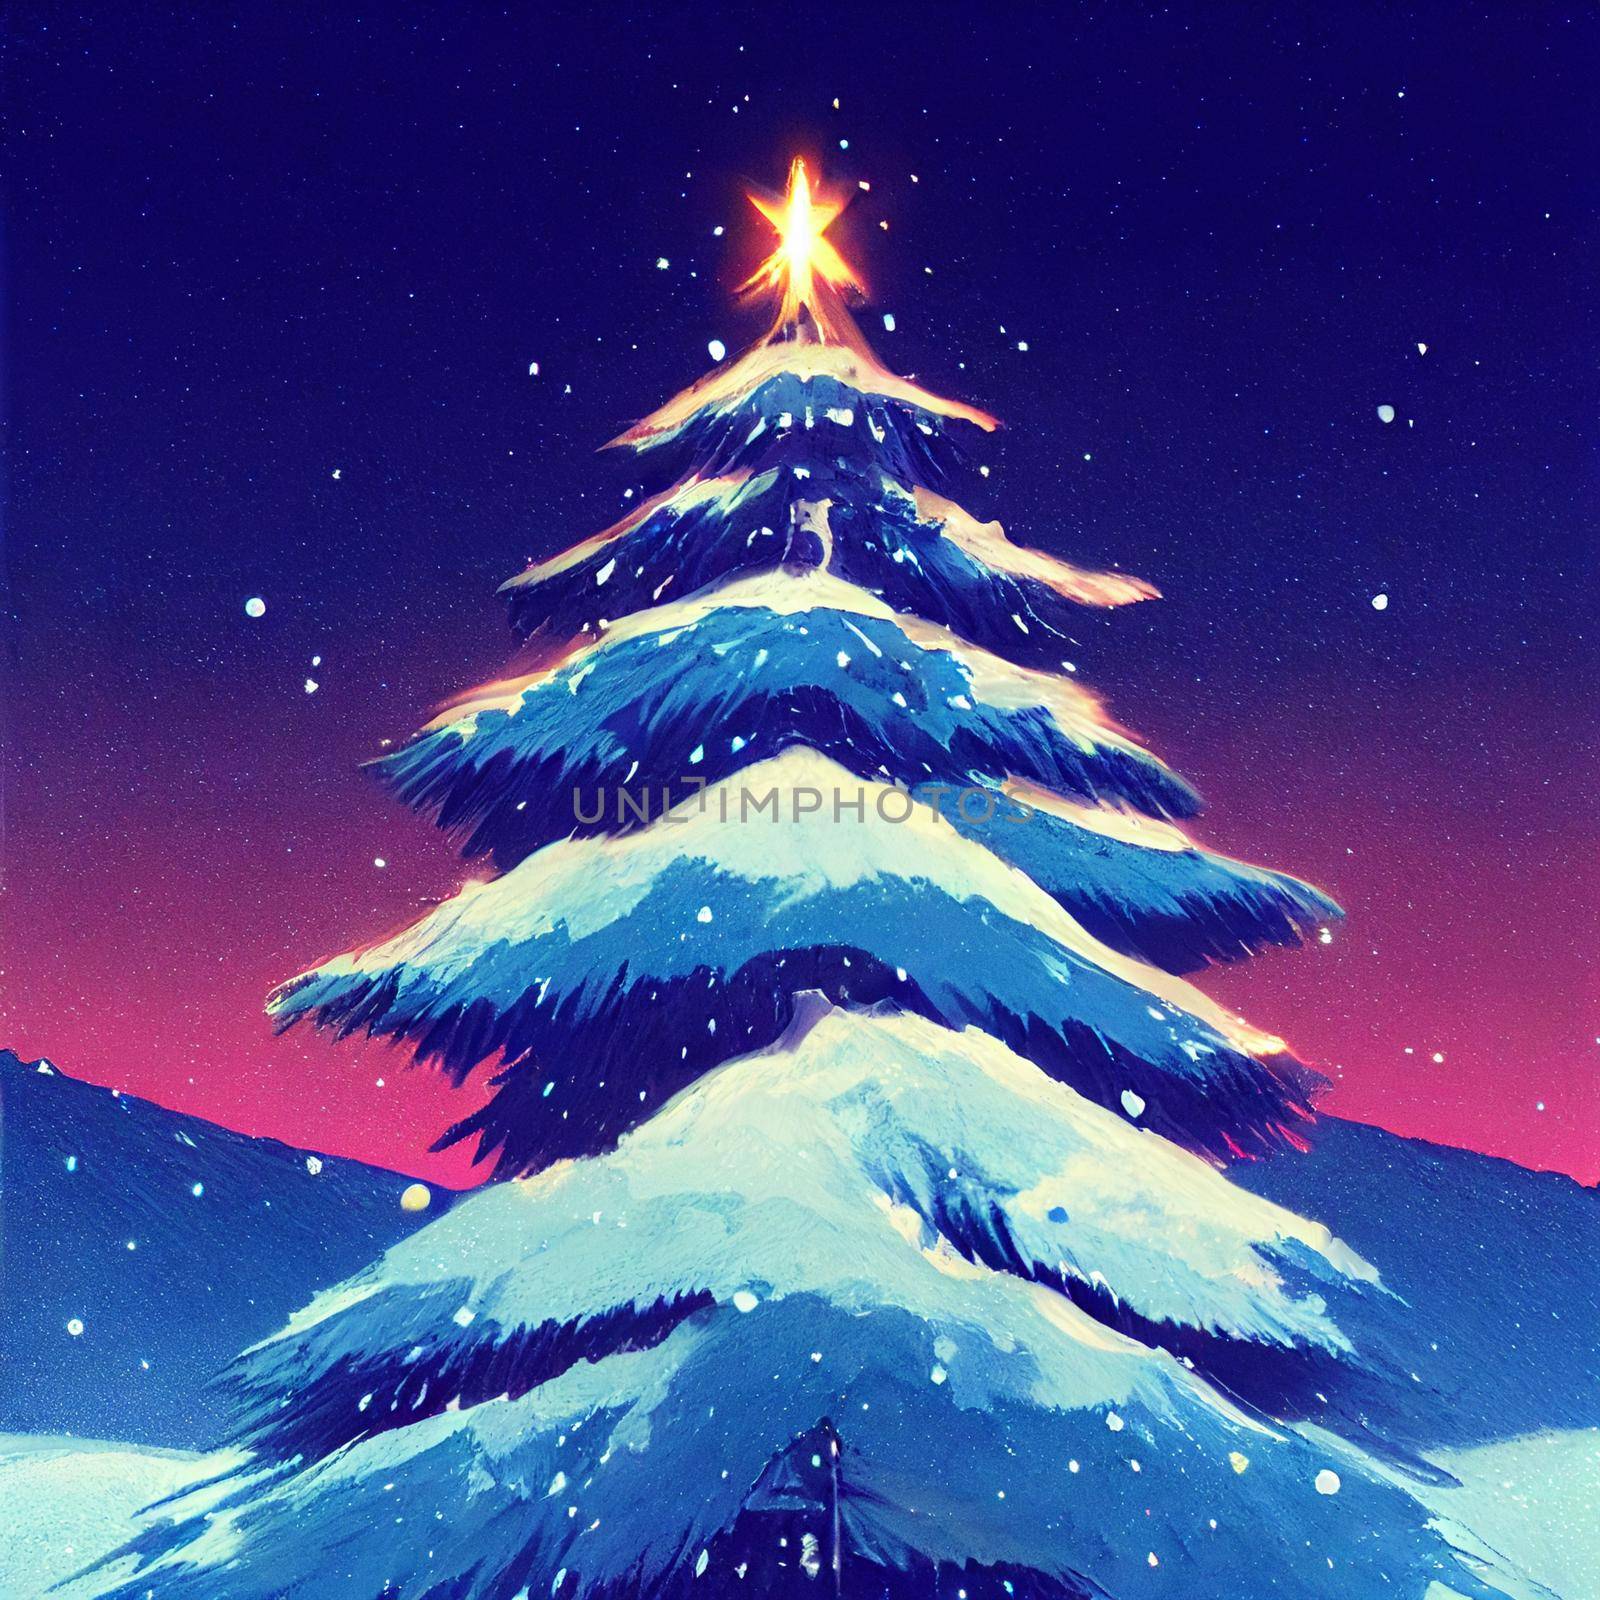 Colorful christmas tree illustration by NeuroSky